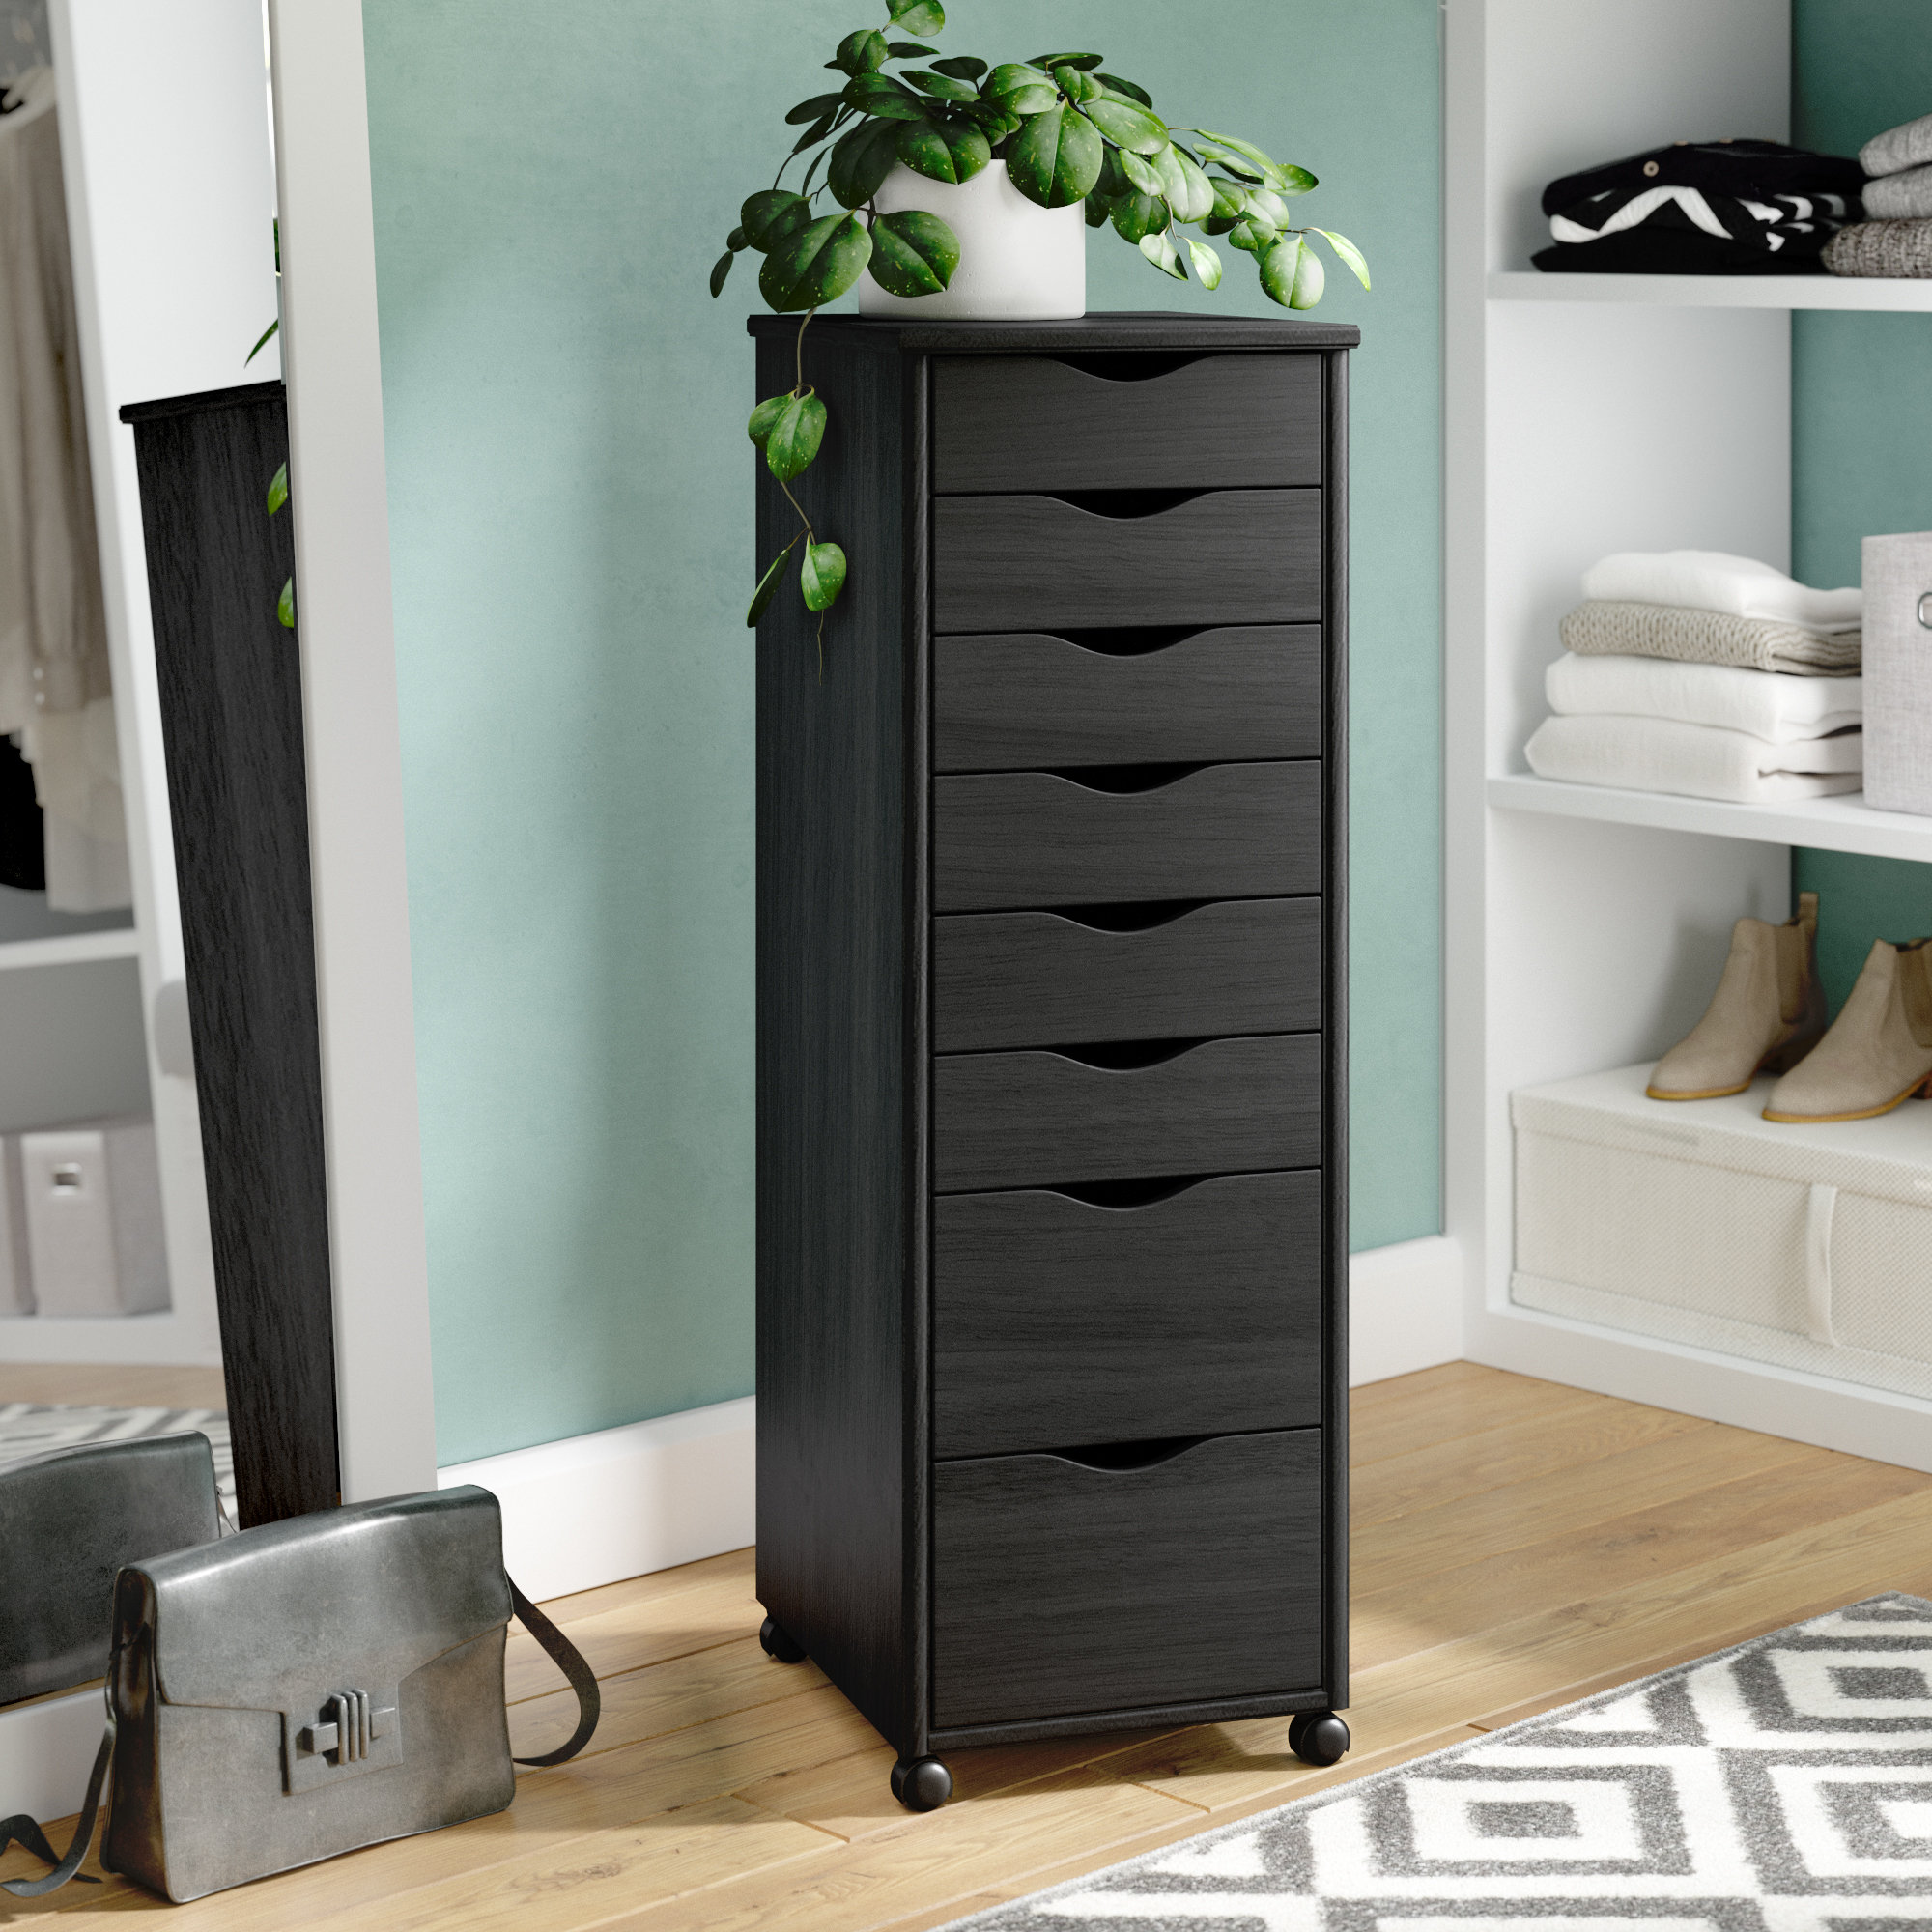 3 Tier Dresser Storage Tower with wheel Storage Drawers Chest Unit Fabric Easy Pull Fabric Bins with Wood Top Multipurpose Drawer Organizer Unit for Closet for Bedroom Living Room 